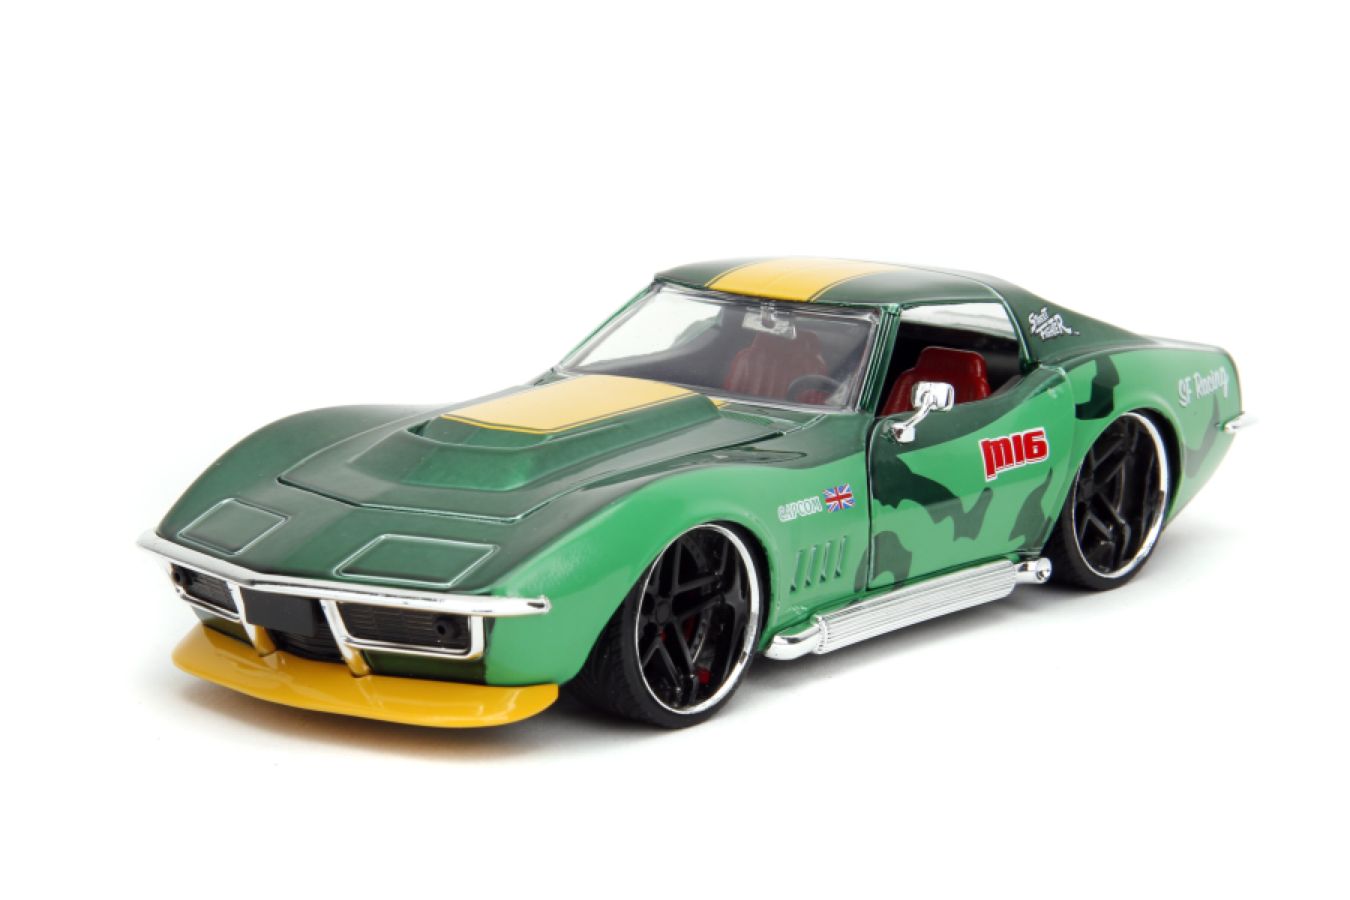 Street Fighter - Chevrolet Corvette Stingray ZL1 (1969) 1:22 Scale with Cammy Figure